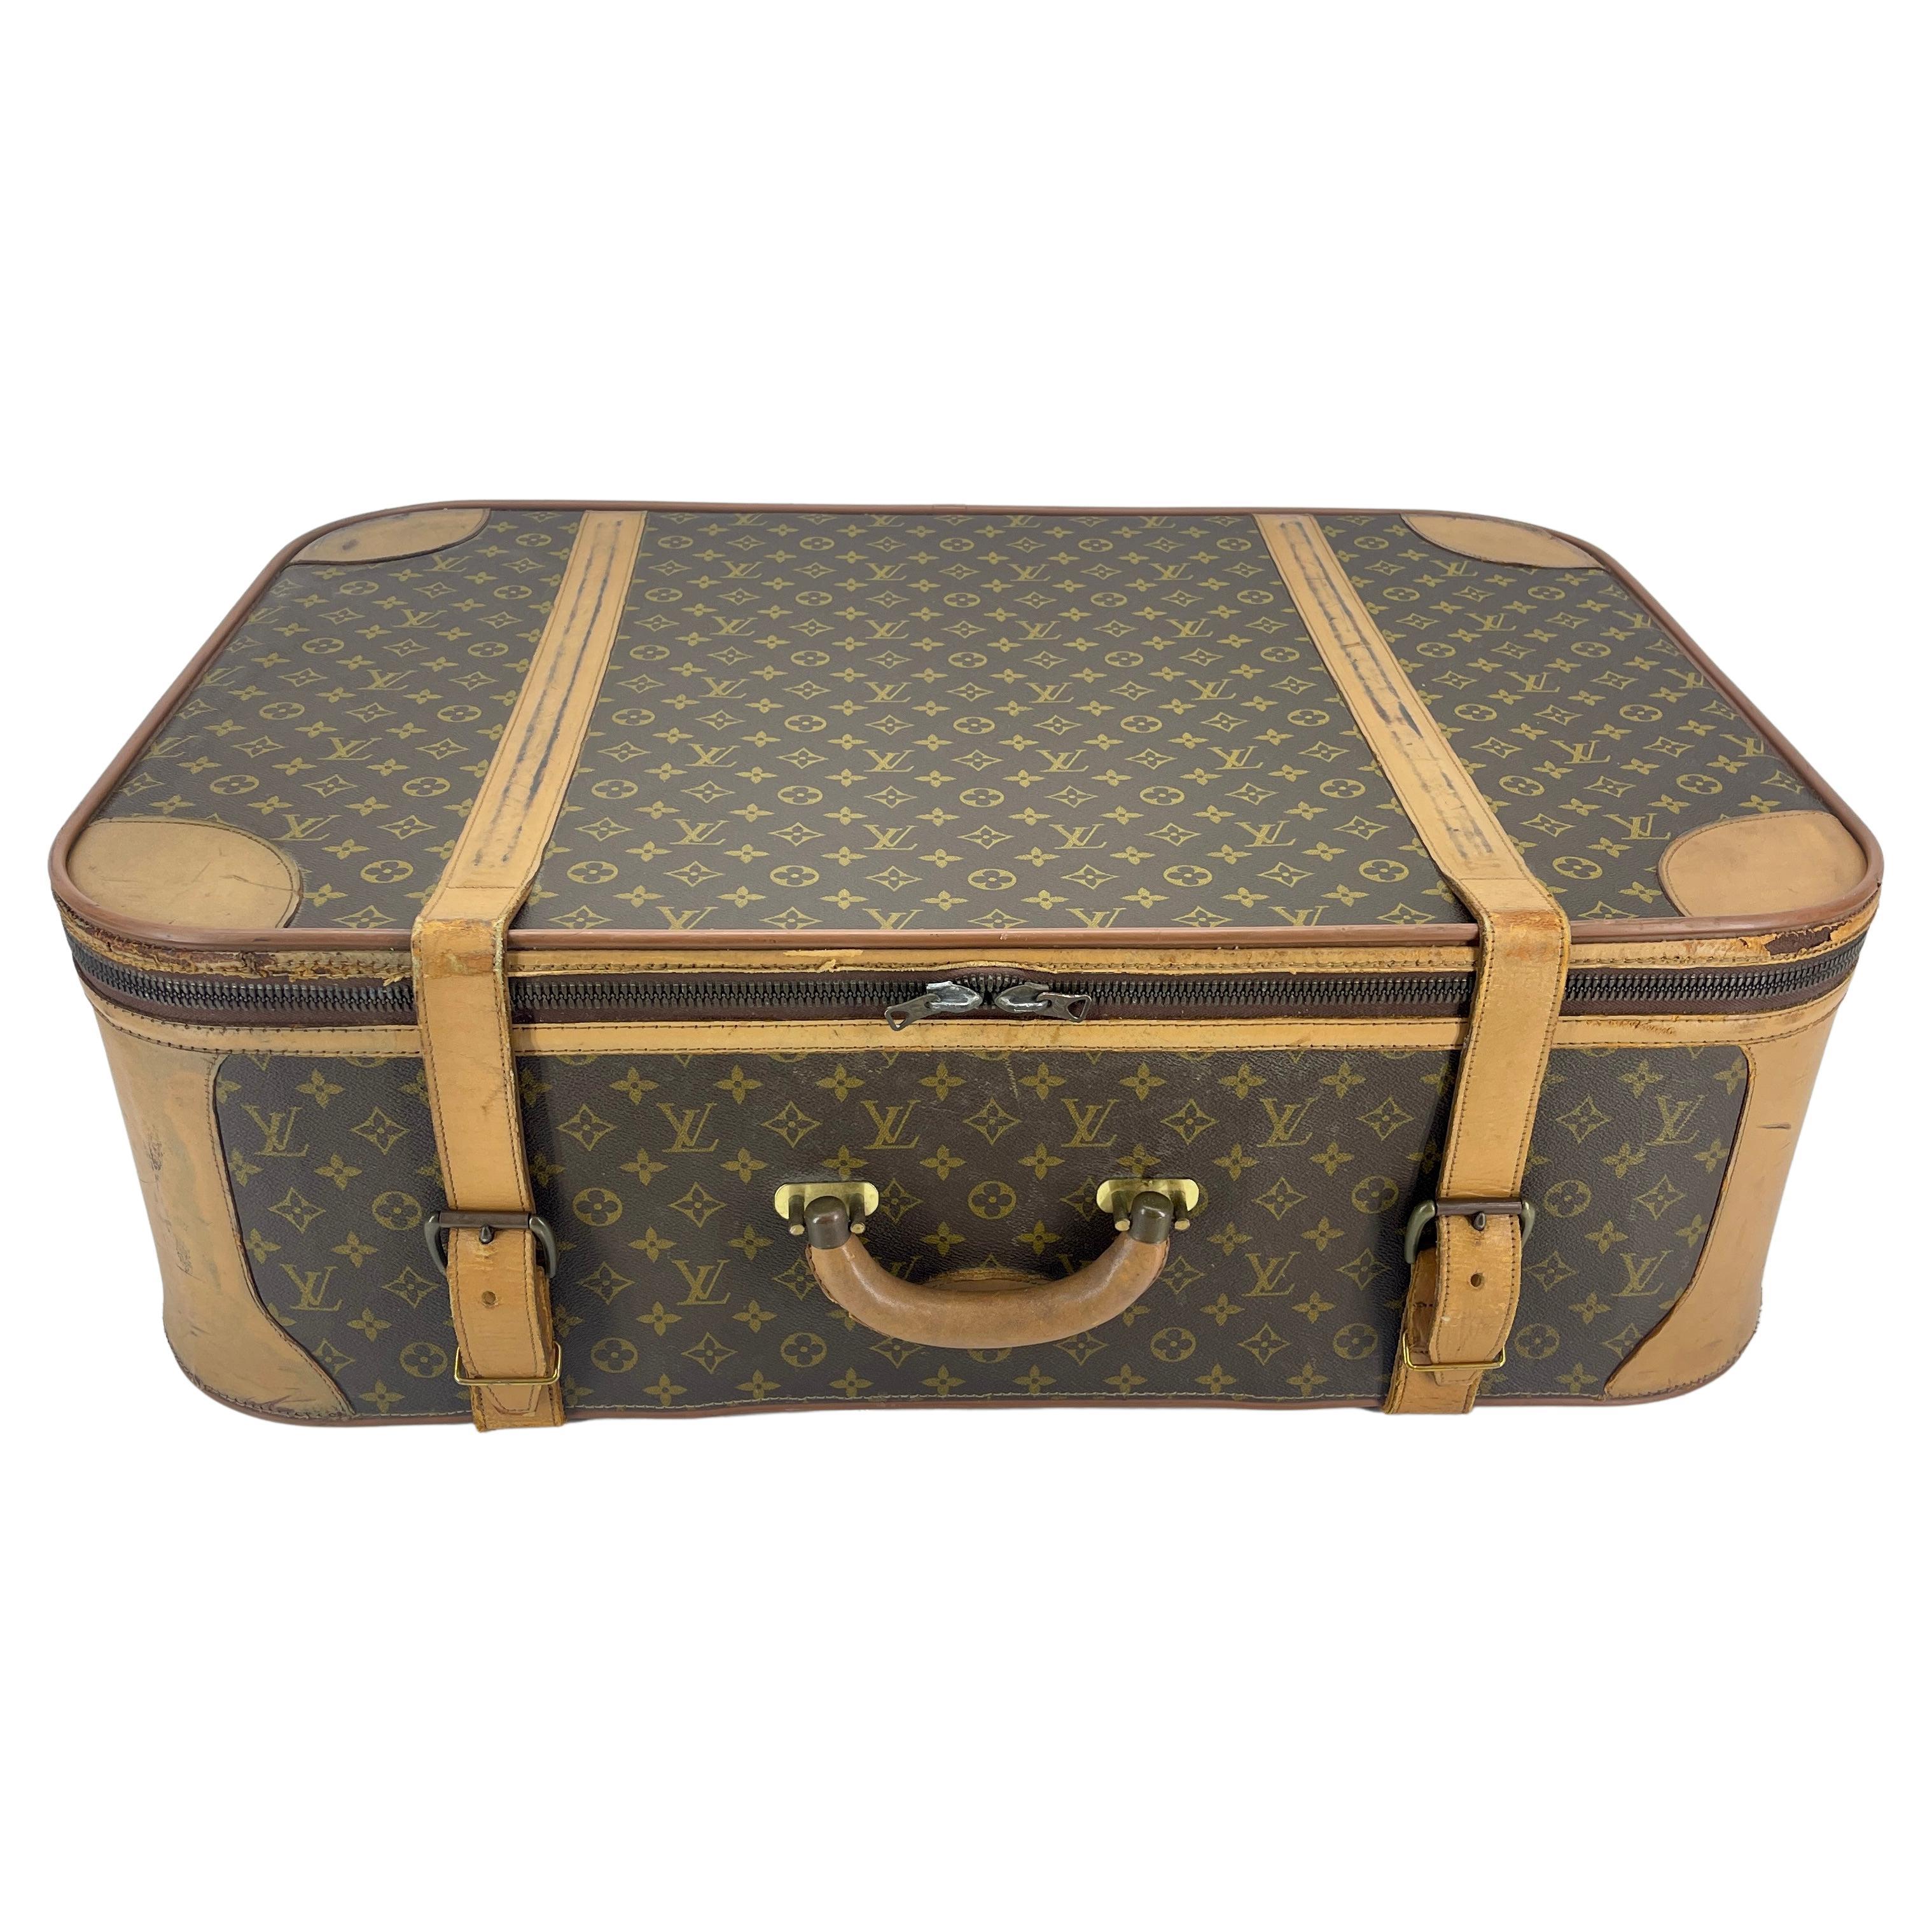 Vintage Monogram Trunk Travel Stratos Suitcase by Louis Vuitton

Crafted with the distinct Monogram brown coated canvas, the Stratos has cowhide leather side supports and bumpers with a yellow fabric interior.

Note this piece has been